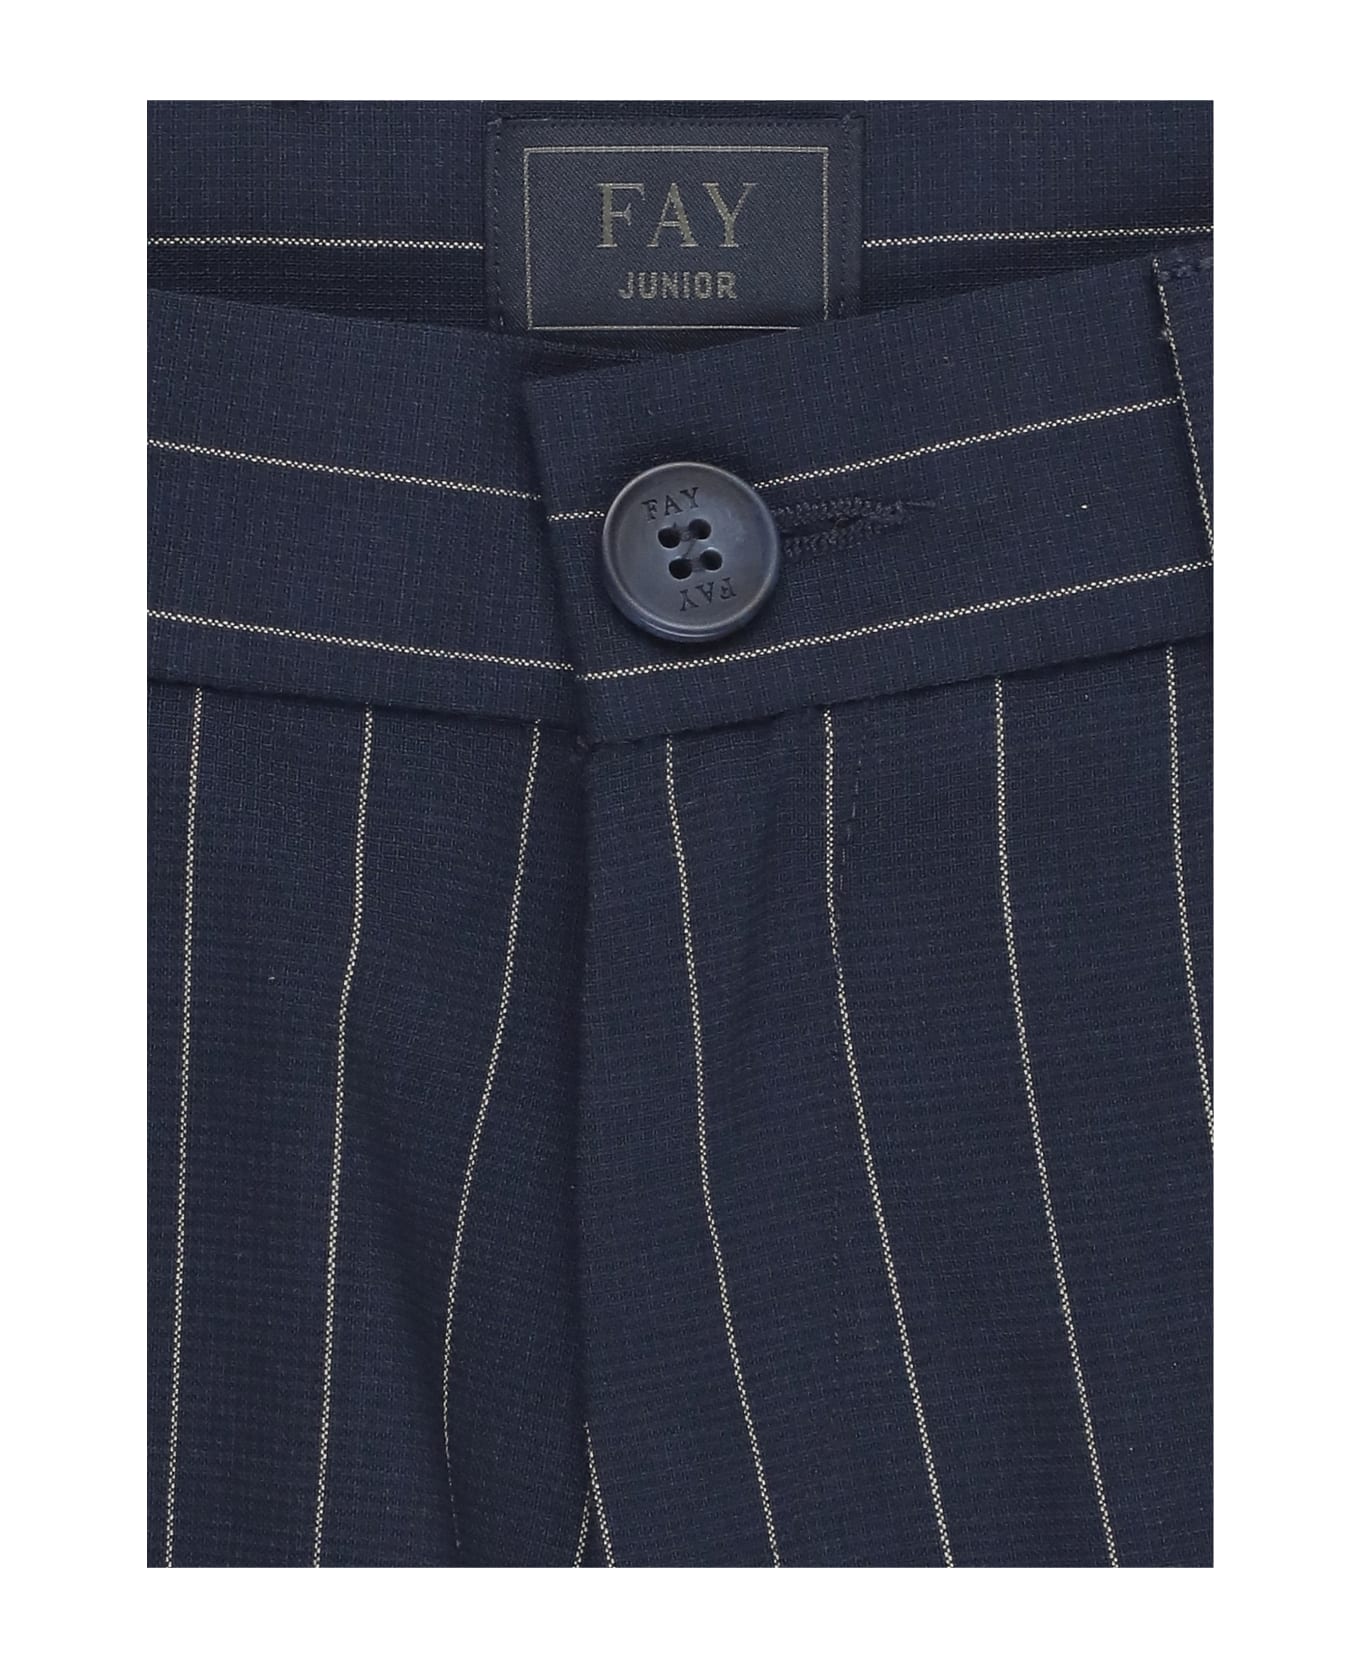 Fay Virgin Wool And Cotton Trousers - Blue ボトムス